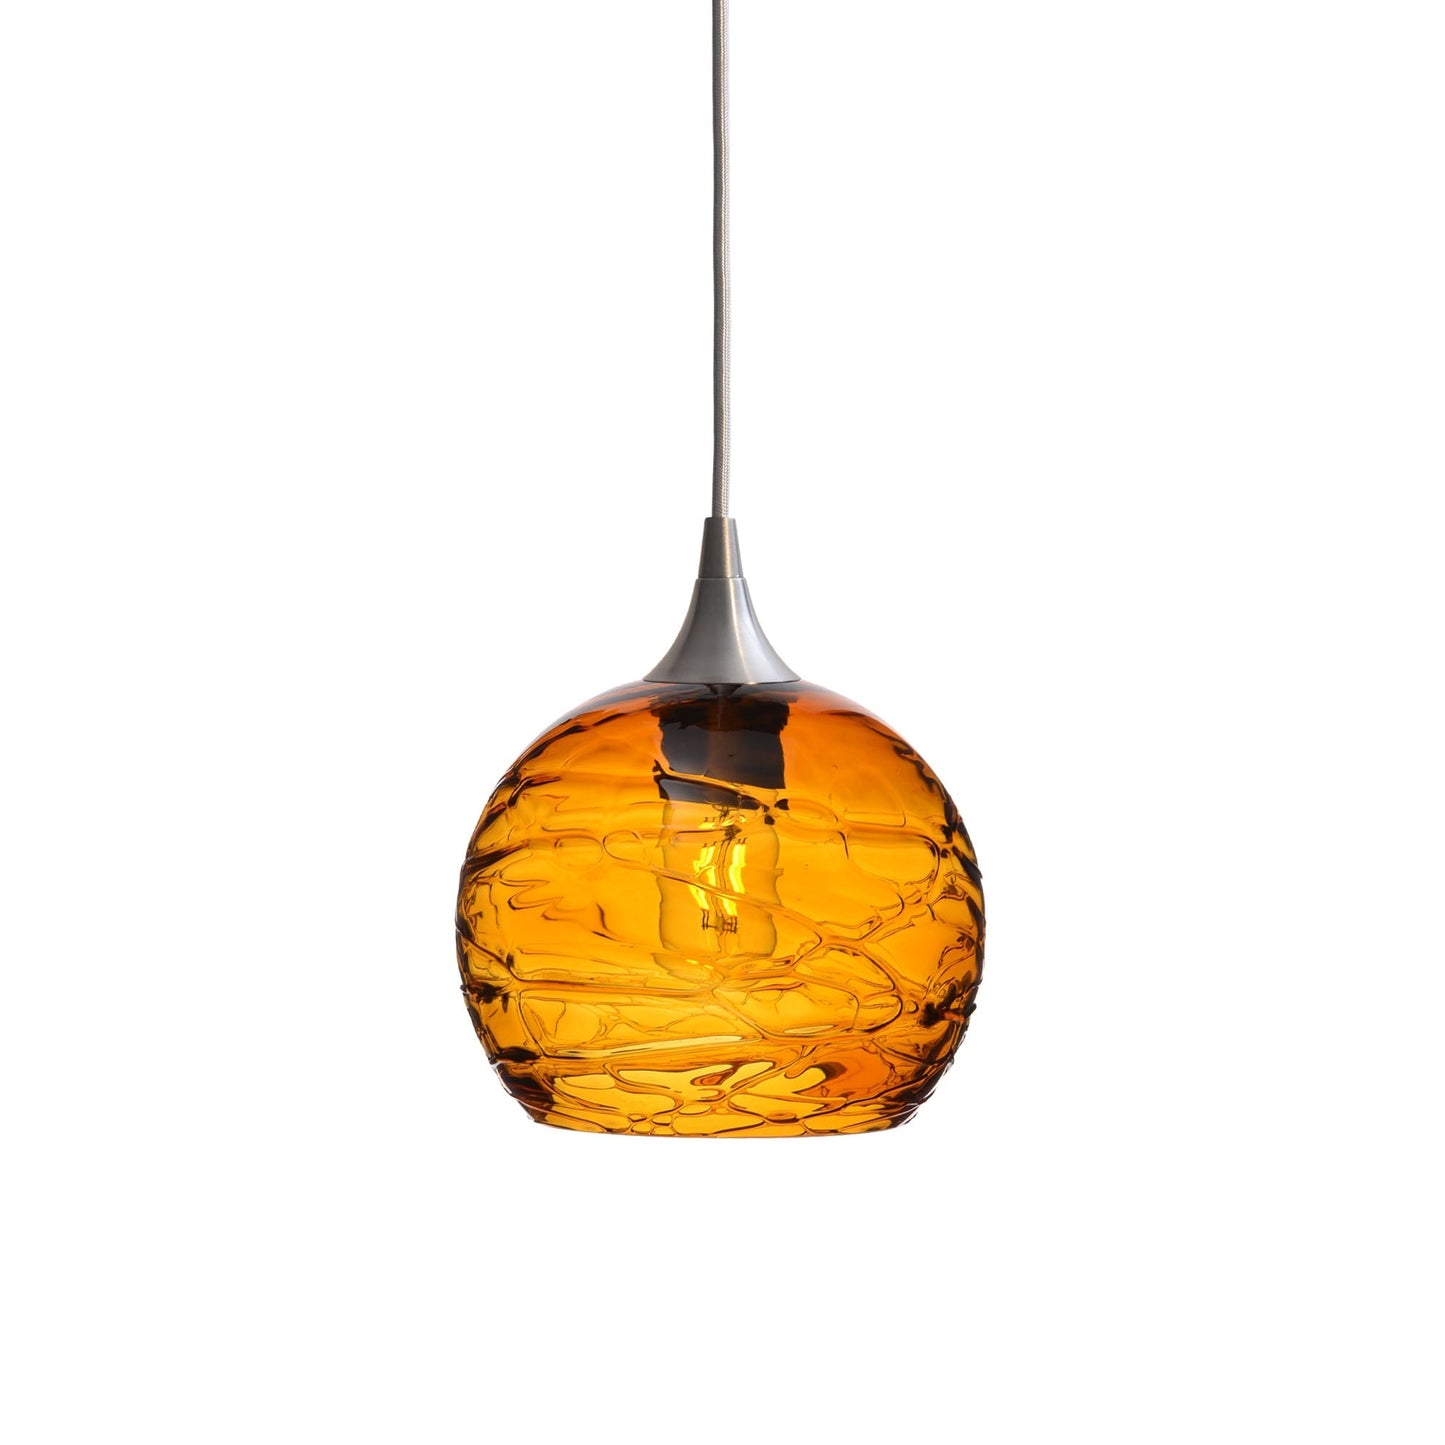 767 Spun: Single Pendant Light-Glass-Bicycle Glass Co - Hotshop-Harvest Gold-Brushed Nickel-Bicycle Glass Co